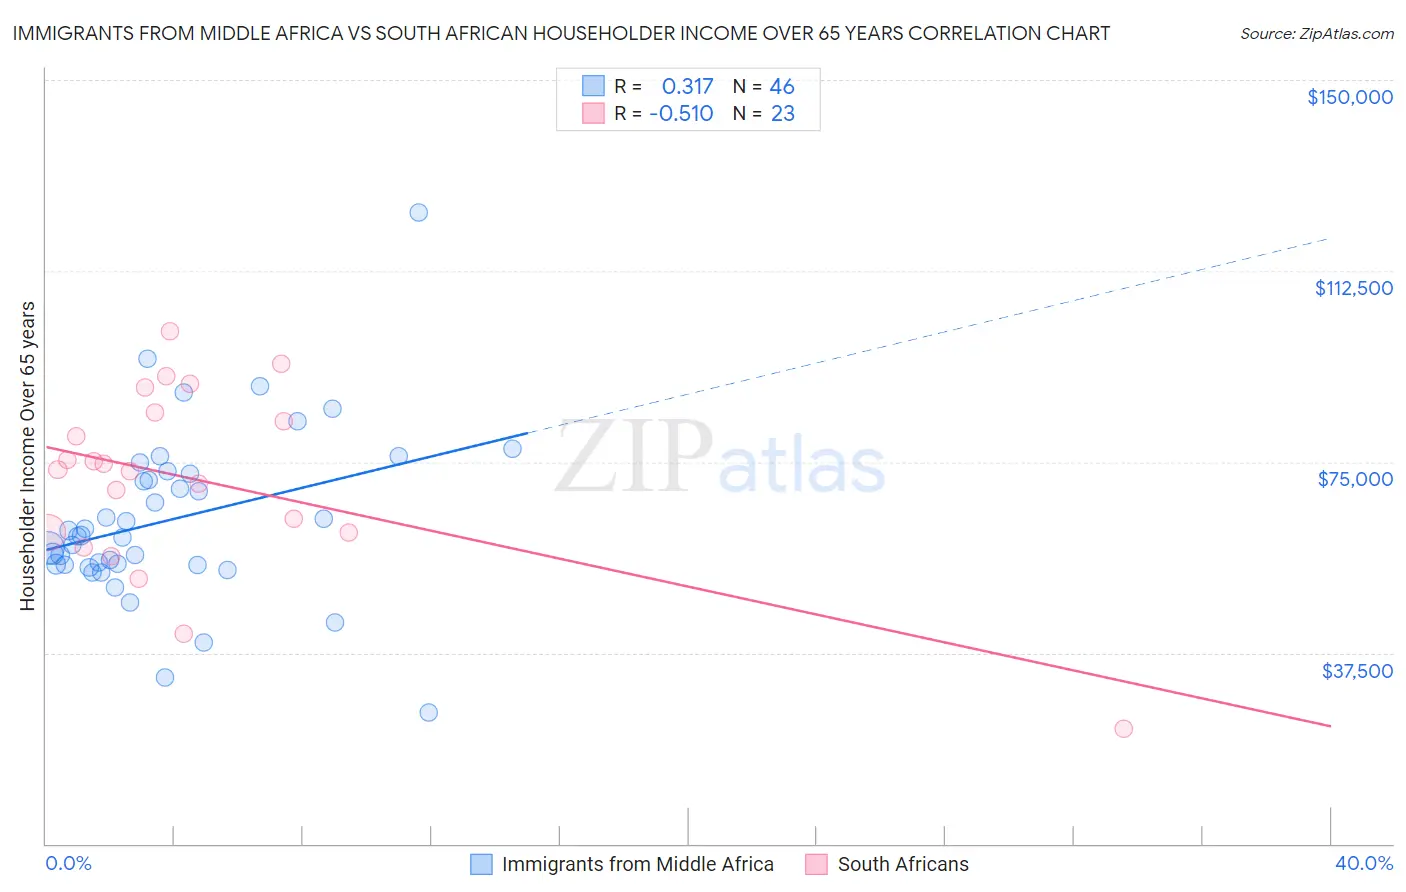 Immigrants from Middle Africa vs South African Householder Income Over 65 years